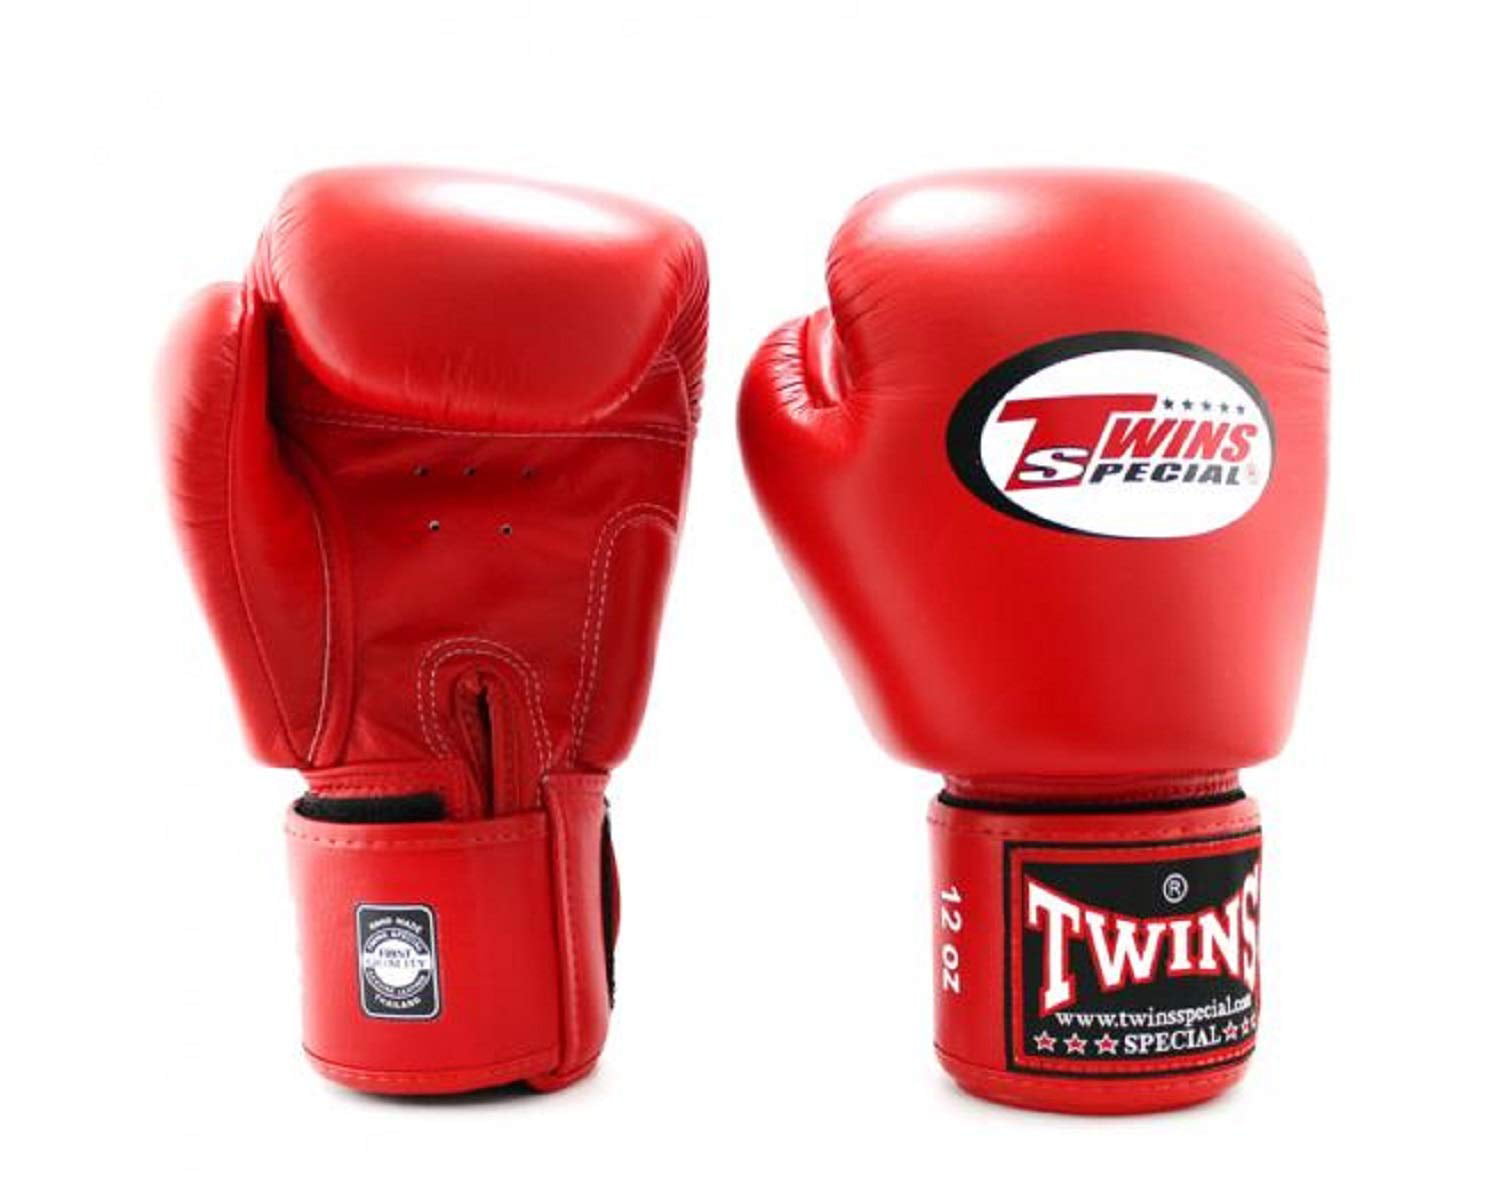 Twins BGVL-3 Leather Boxing Gloves Red Boxing Sparring Kickboxing Muay Thai K1 